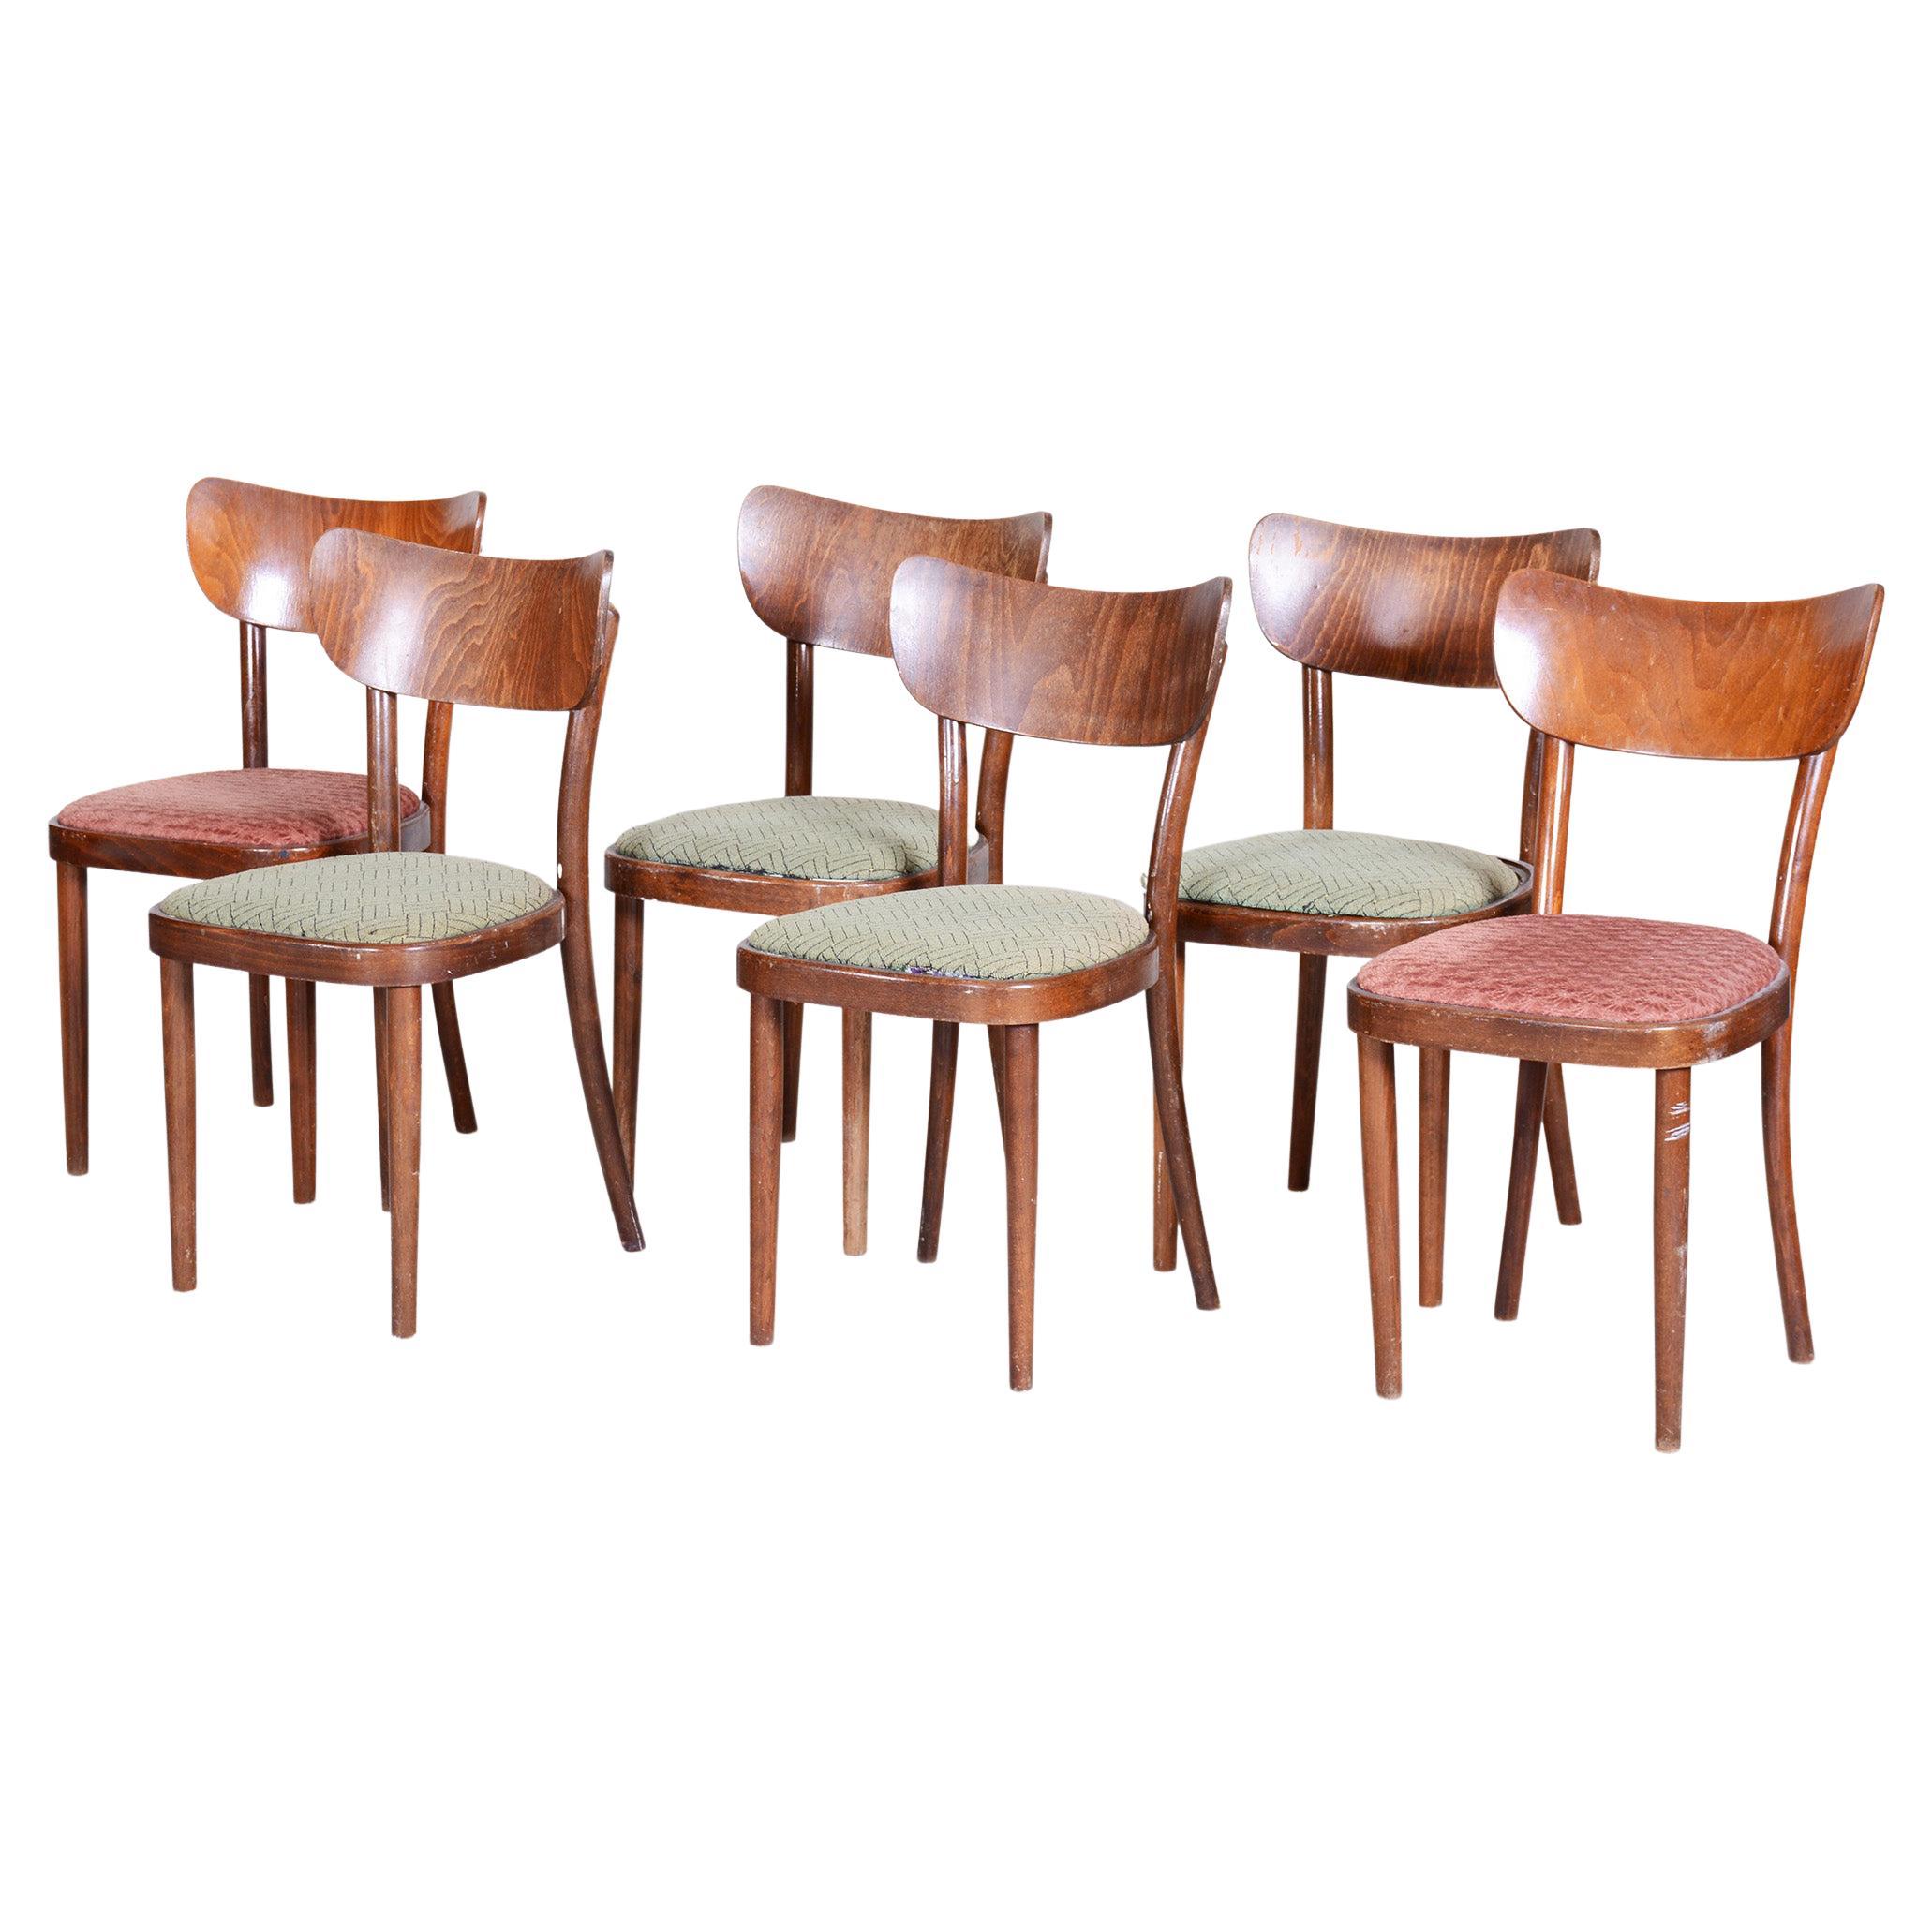 Set of 6 Dining Chairs Made by TON - 1940s, Czechia